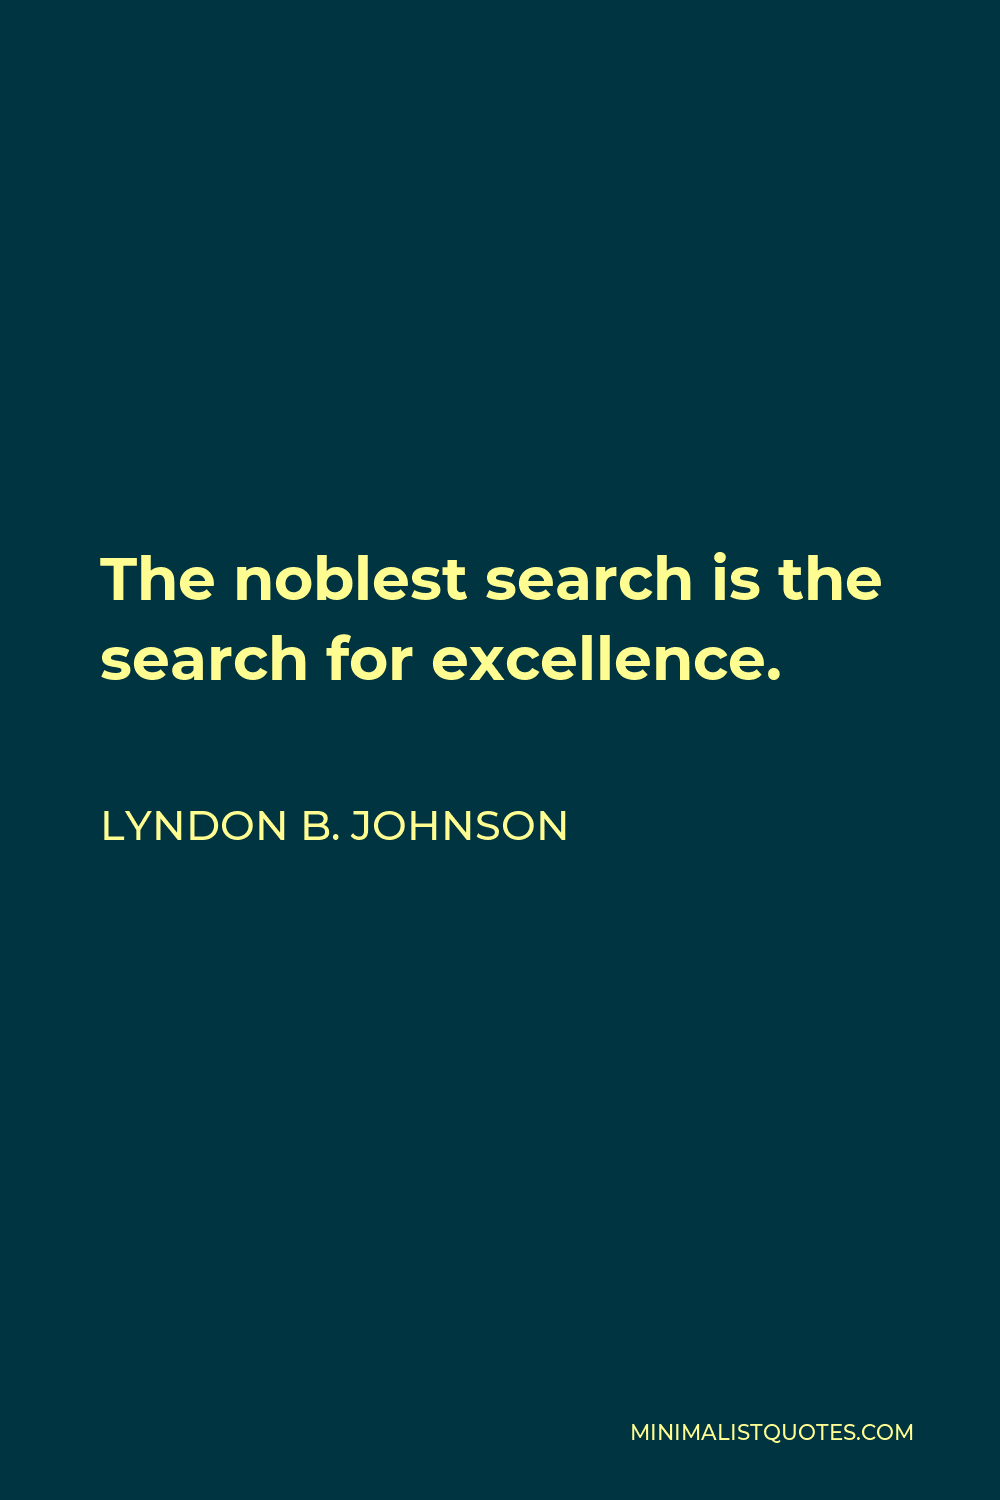 Lyndon B. Johnson Quote - The noblest search is the search for excellence.